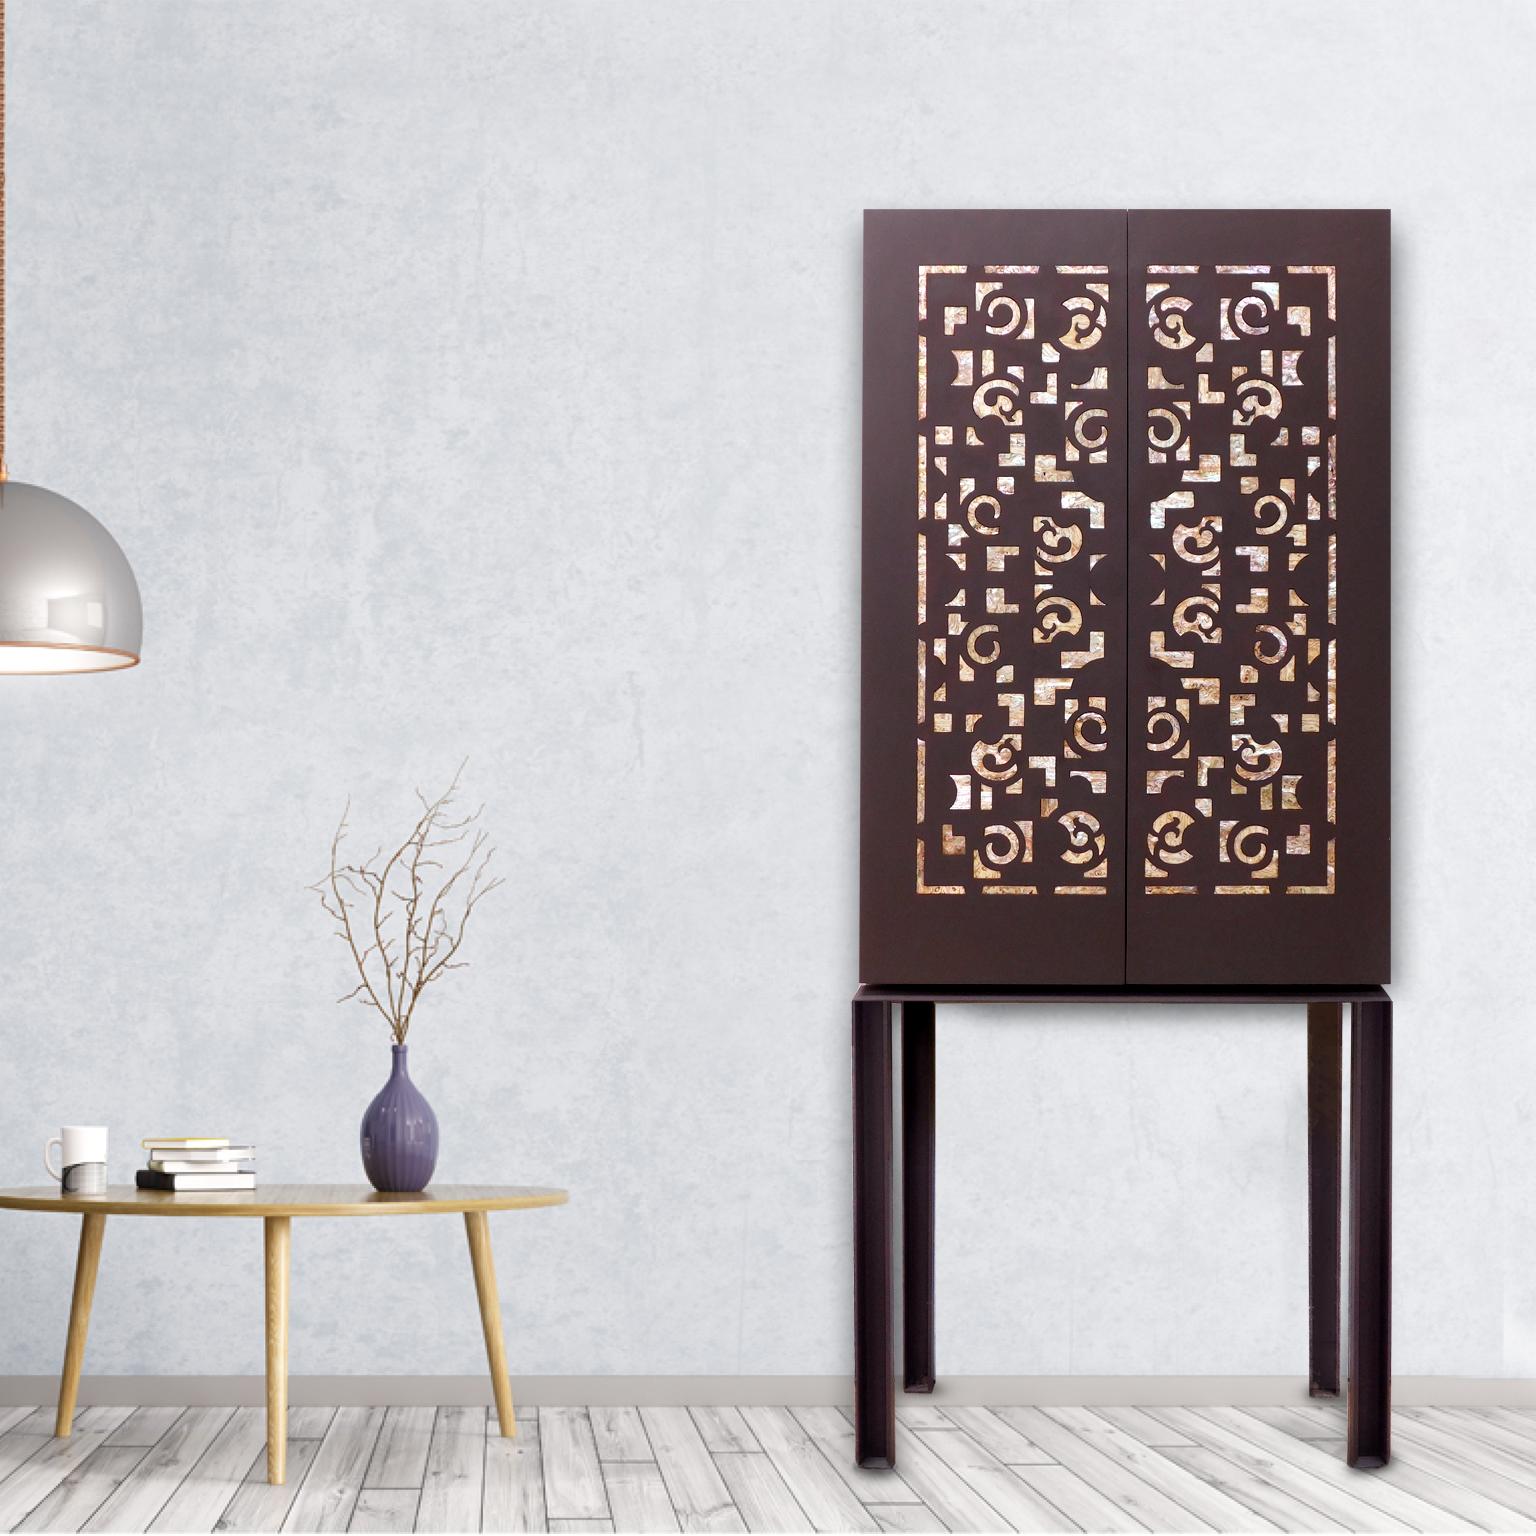 Unique contemporary styled steel cabinet with mother of pearl applications.